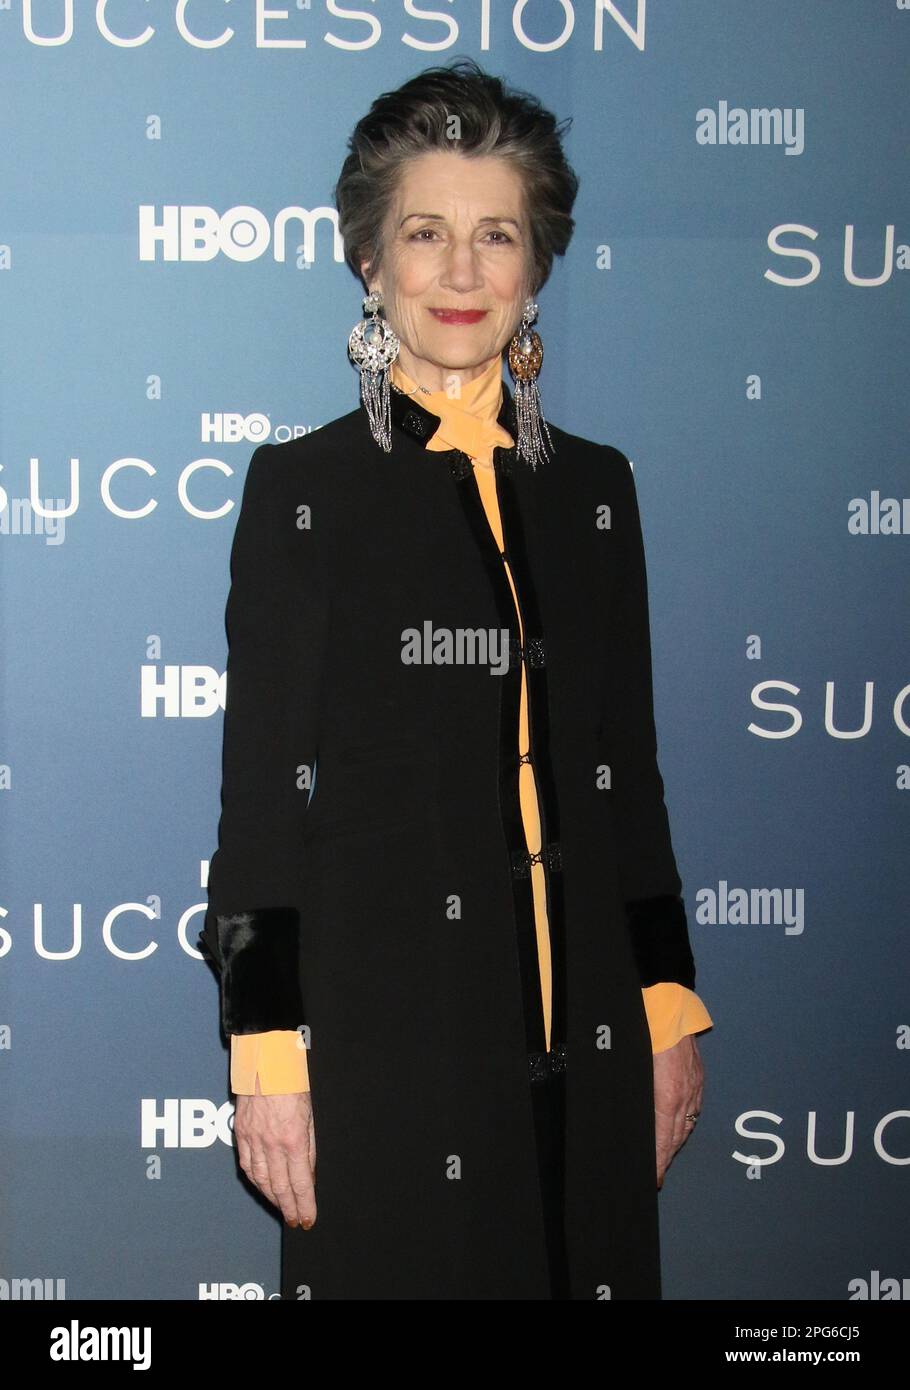 New York, NY, USA. 20th Mar, 2023. Harriet Walte at the final season premiere of HBO's Succession at Jazz at Lincoln Center in New York City on March 20, 2023. Credit: Rw/Media Punch/Alamy Live News Stock Photo